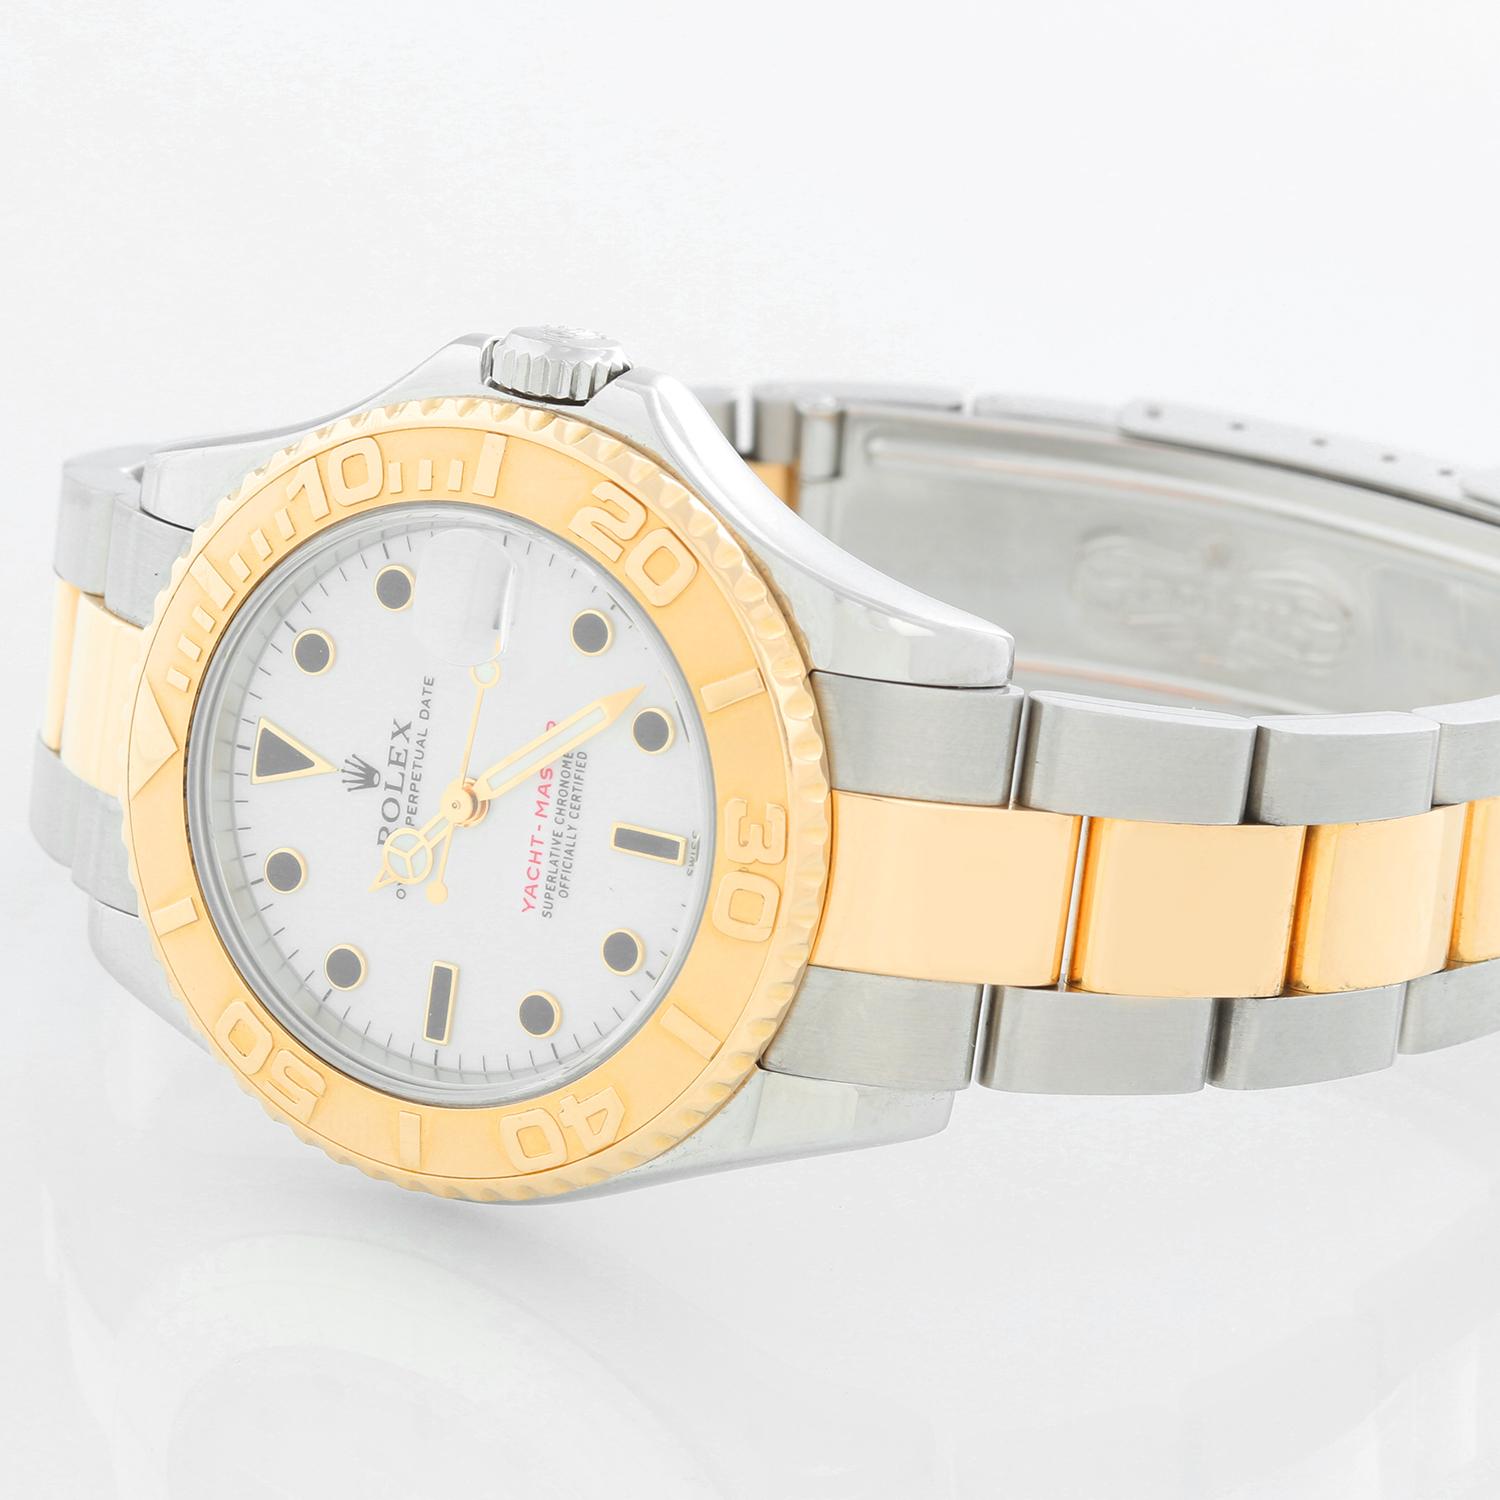 Rolex Midsize Yacht-Master  35mm Steel & Gold Men's or Ladies Watch 168623 - Automatic winding; sapphire crystal. Stainless steel case with 18k yellow gold bezel . White dial with black hour markers. Stainless steel and 18k yellow gold Oyster